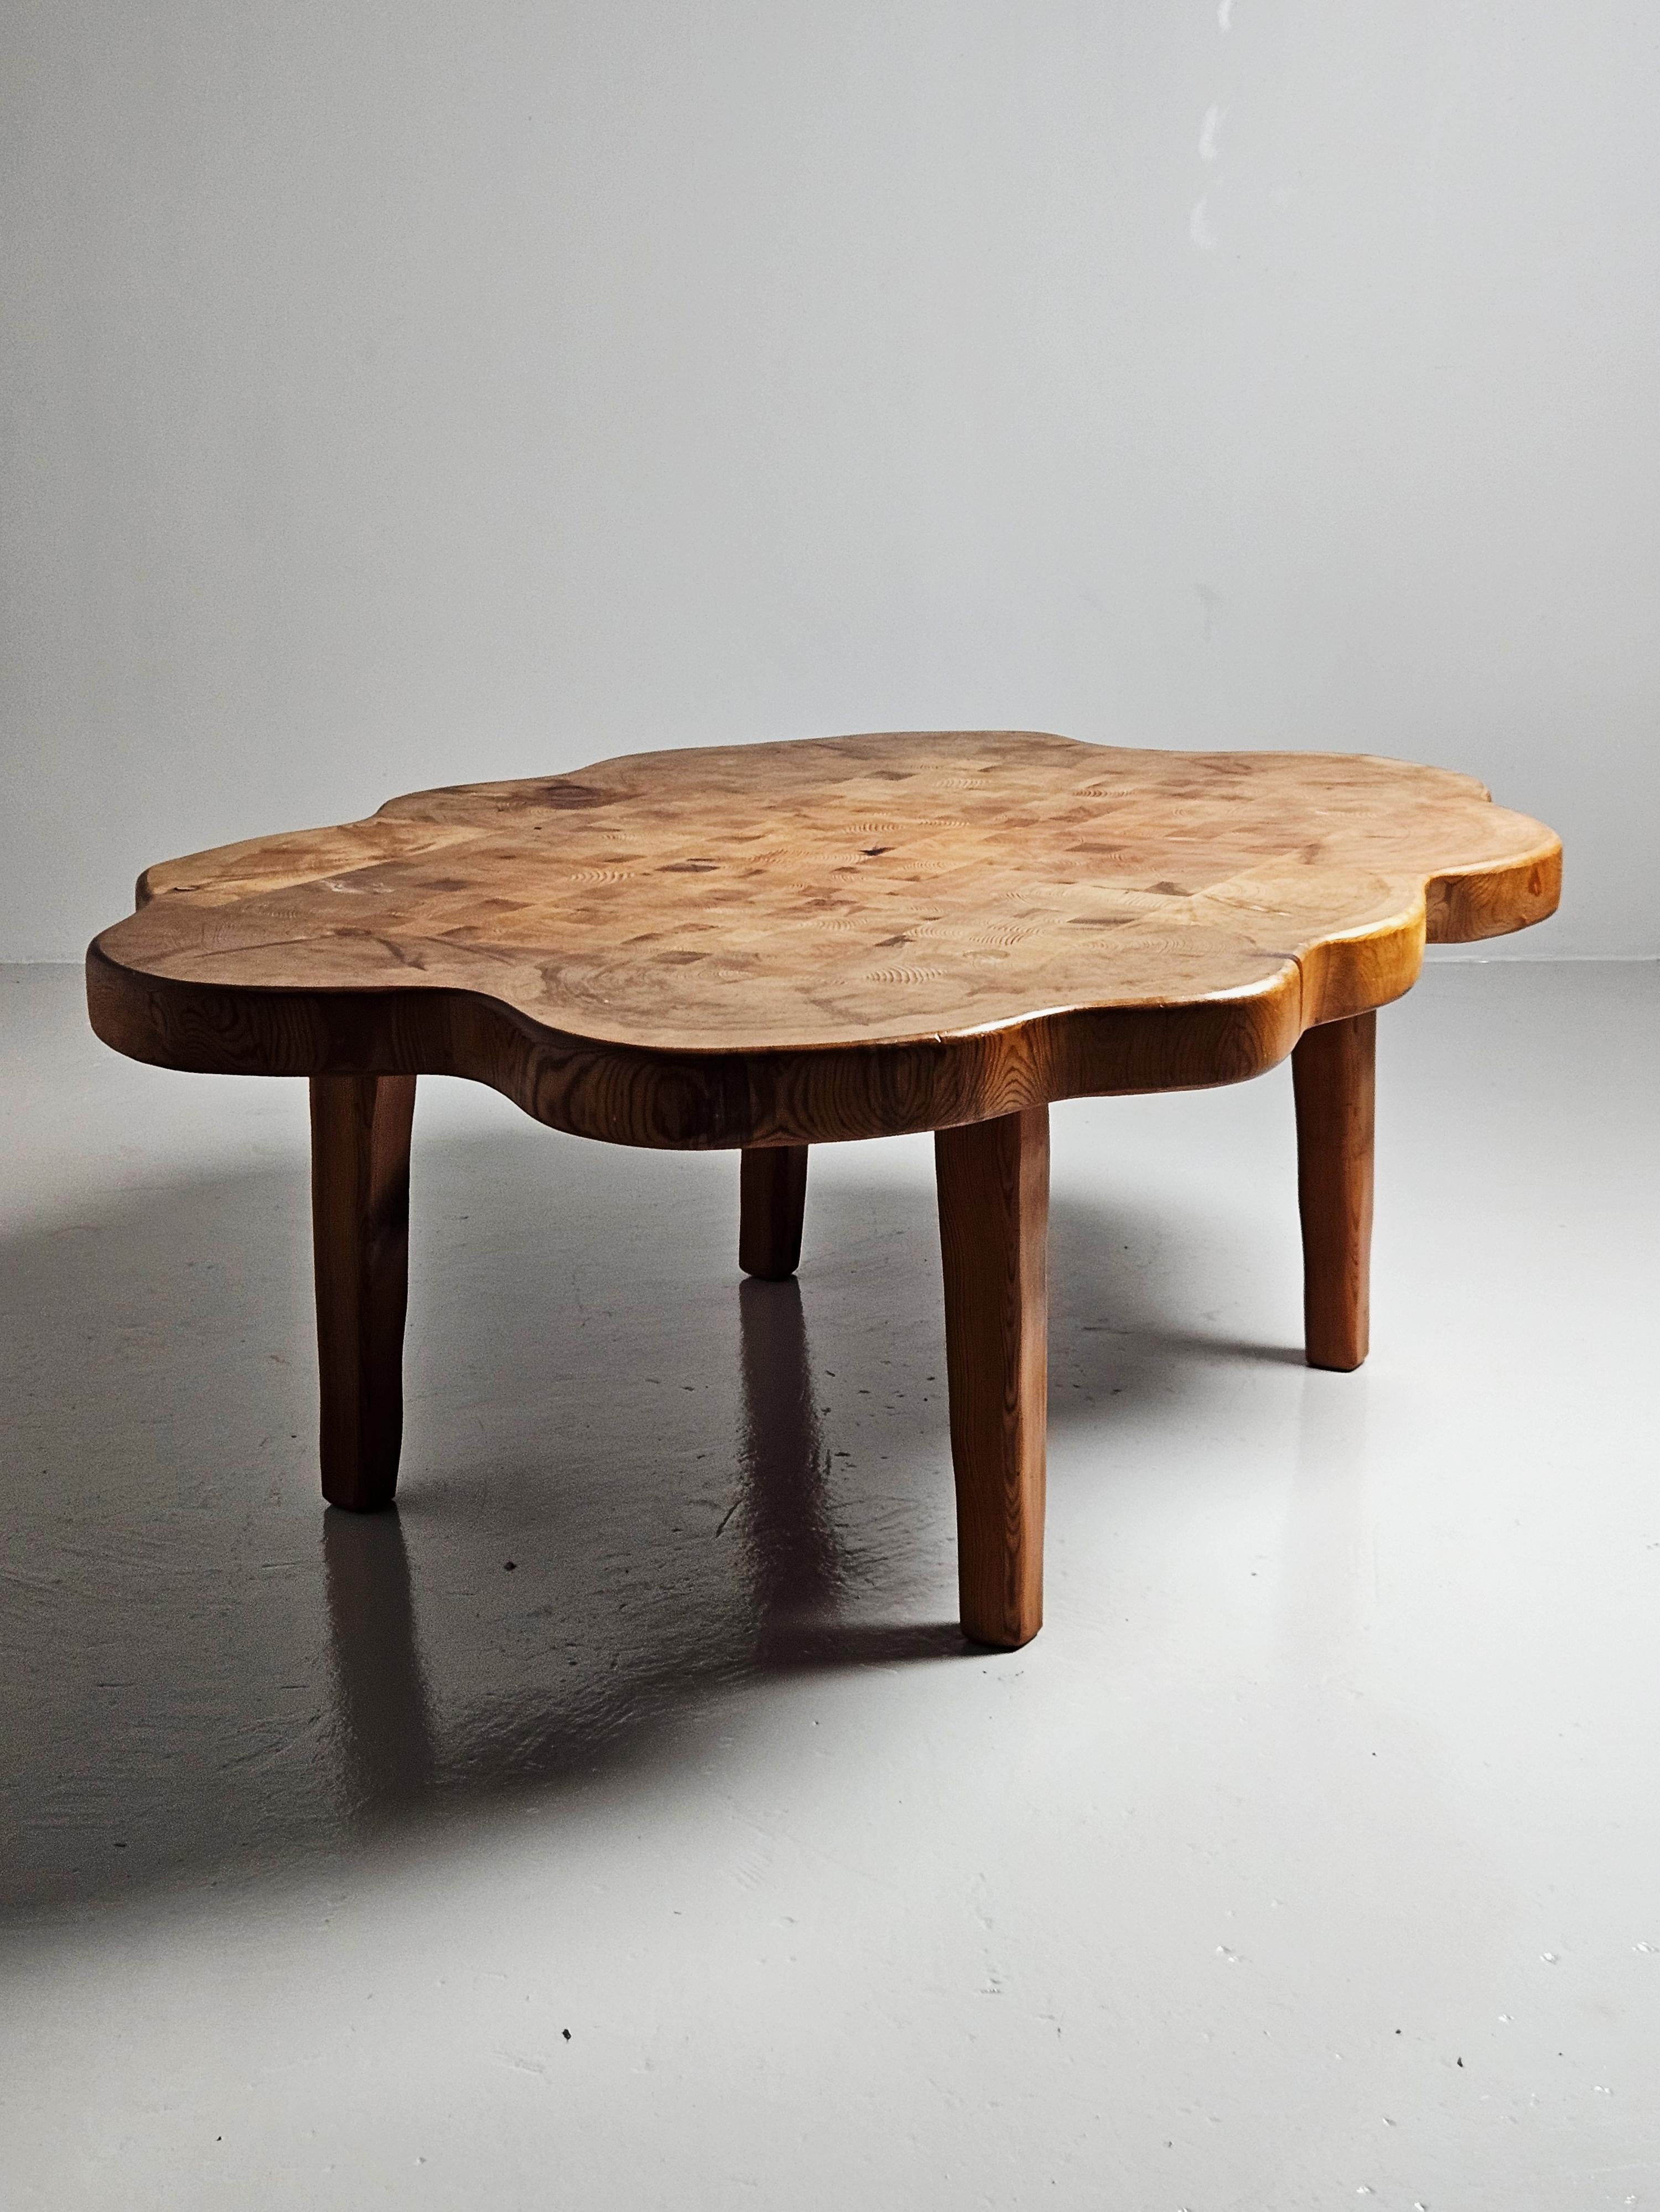 20th Century Assymetrical coffee table in pine by unknown designer, Sweden 1960s or 1970s